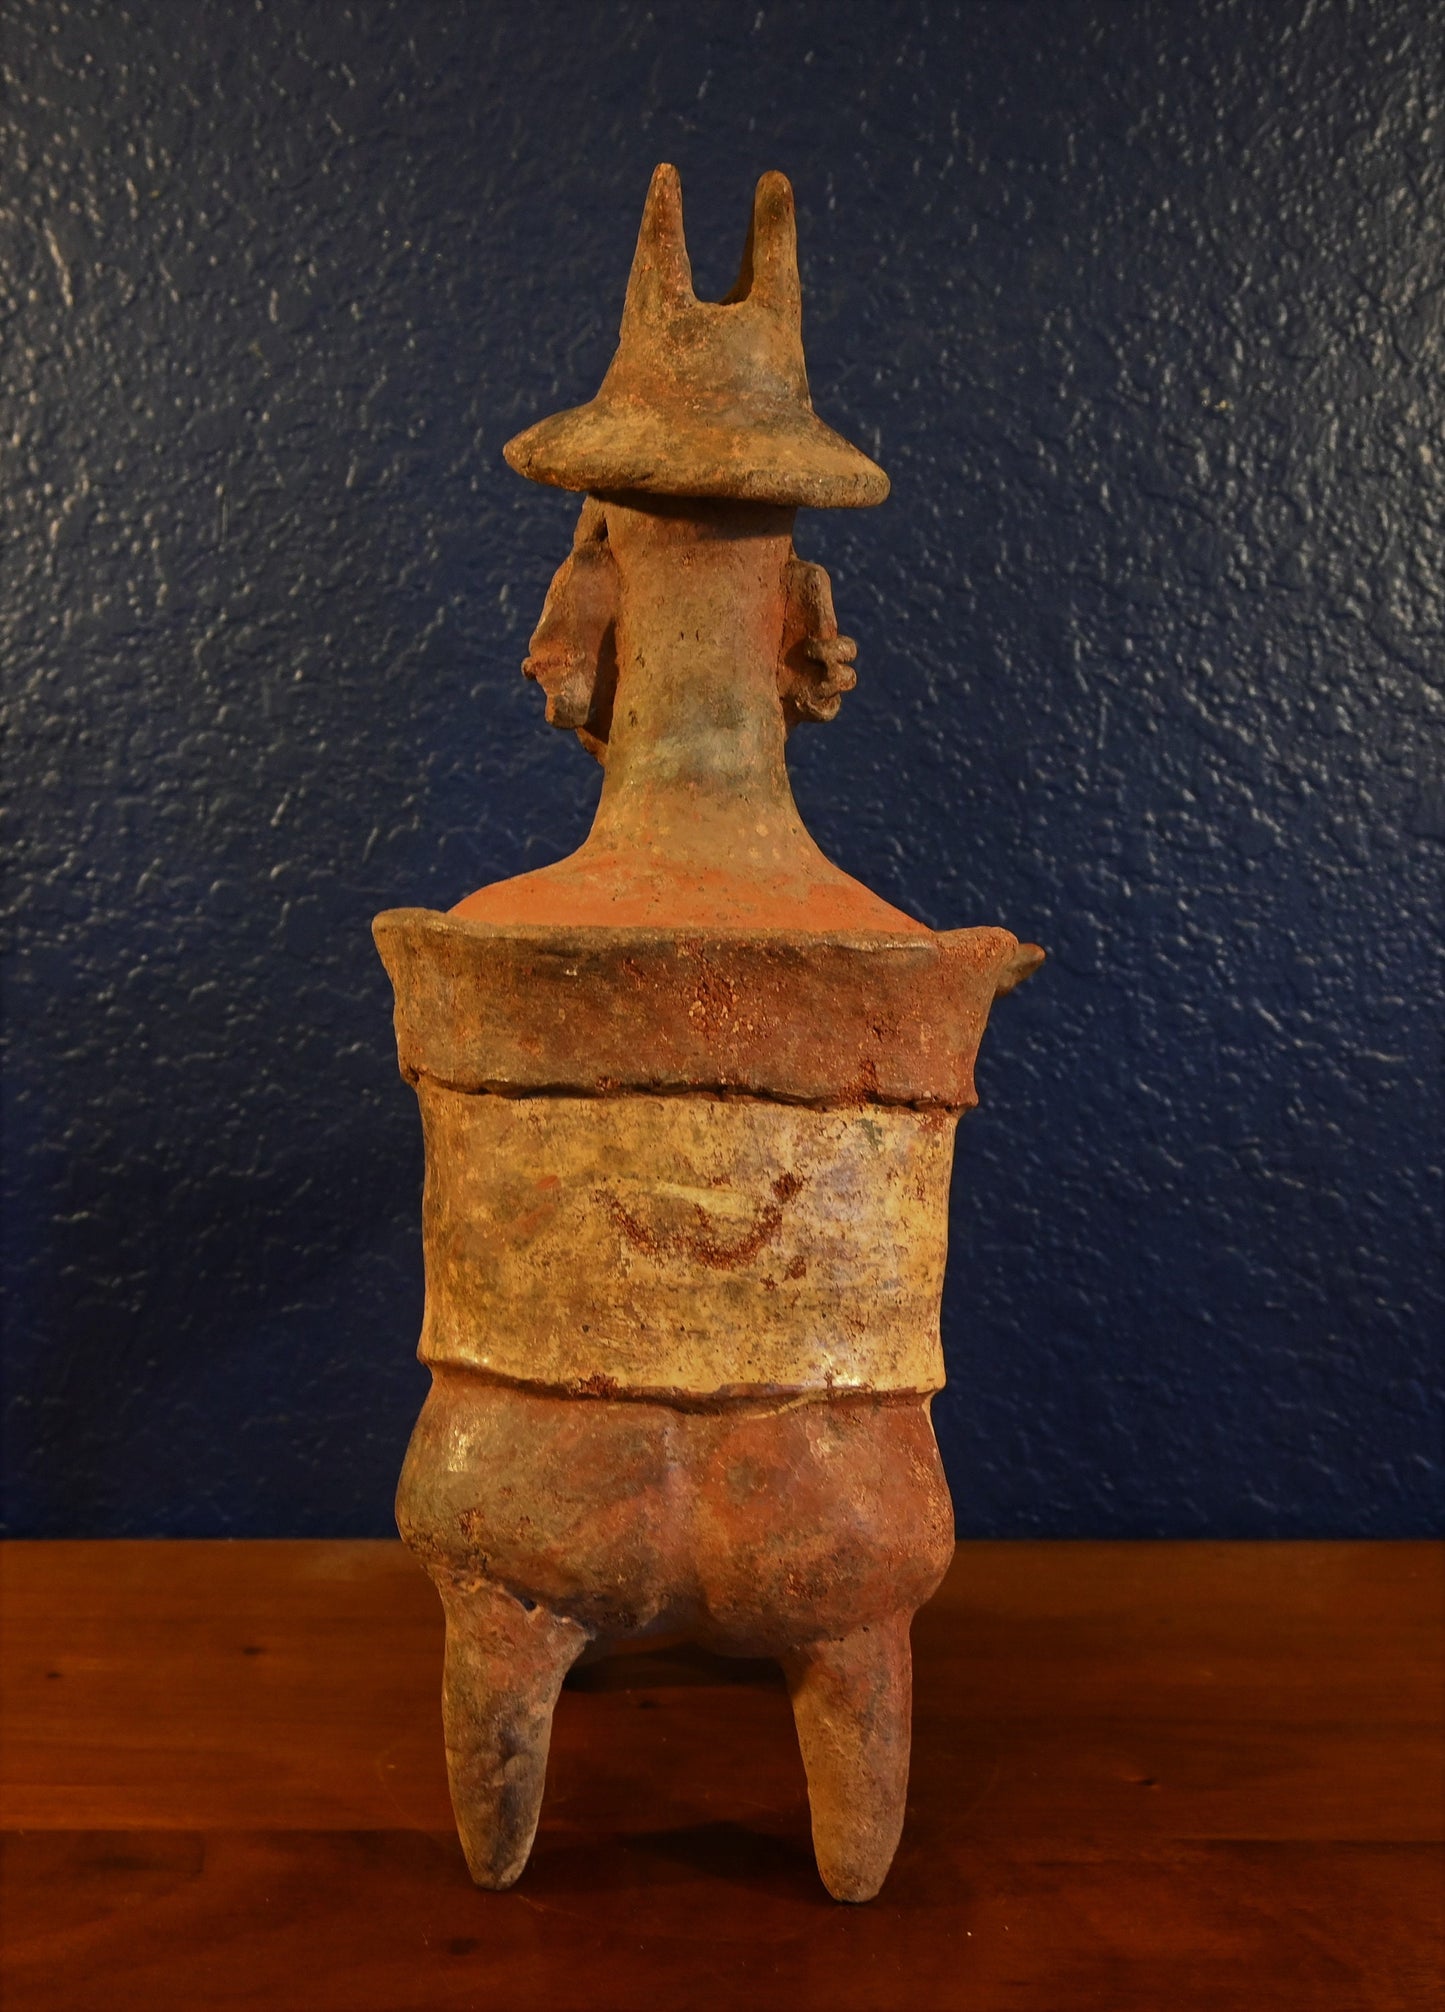 Large (17 5/8 inches) Authentic Nayarit, ca. 100 BCE to 250 CE Pre-Columbian Barrel Seated Warrior w/ Certificate Authenticity & Provenance